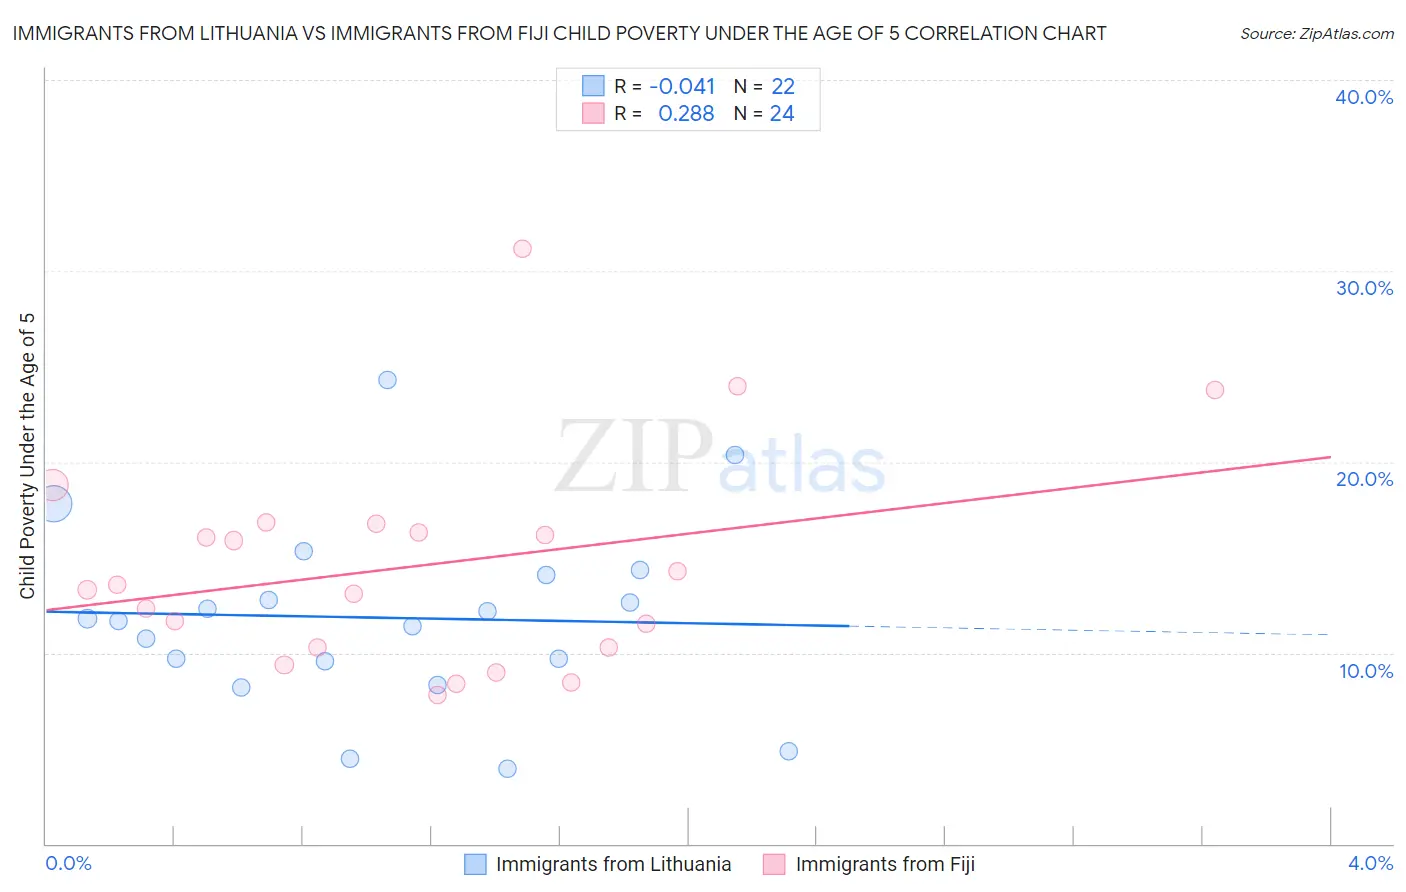 Immigrants from Lithuania vs Immigrants from Fiji Child Poverty Under the Age of 5